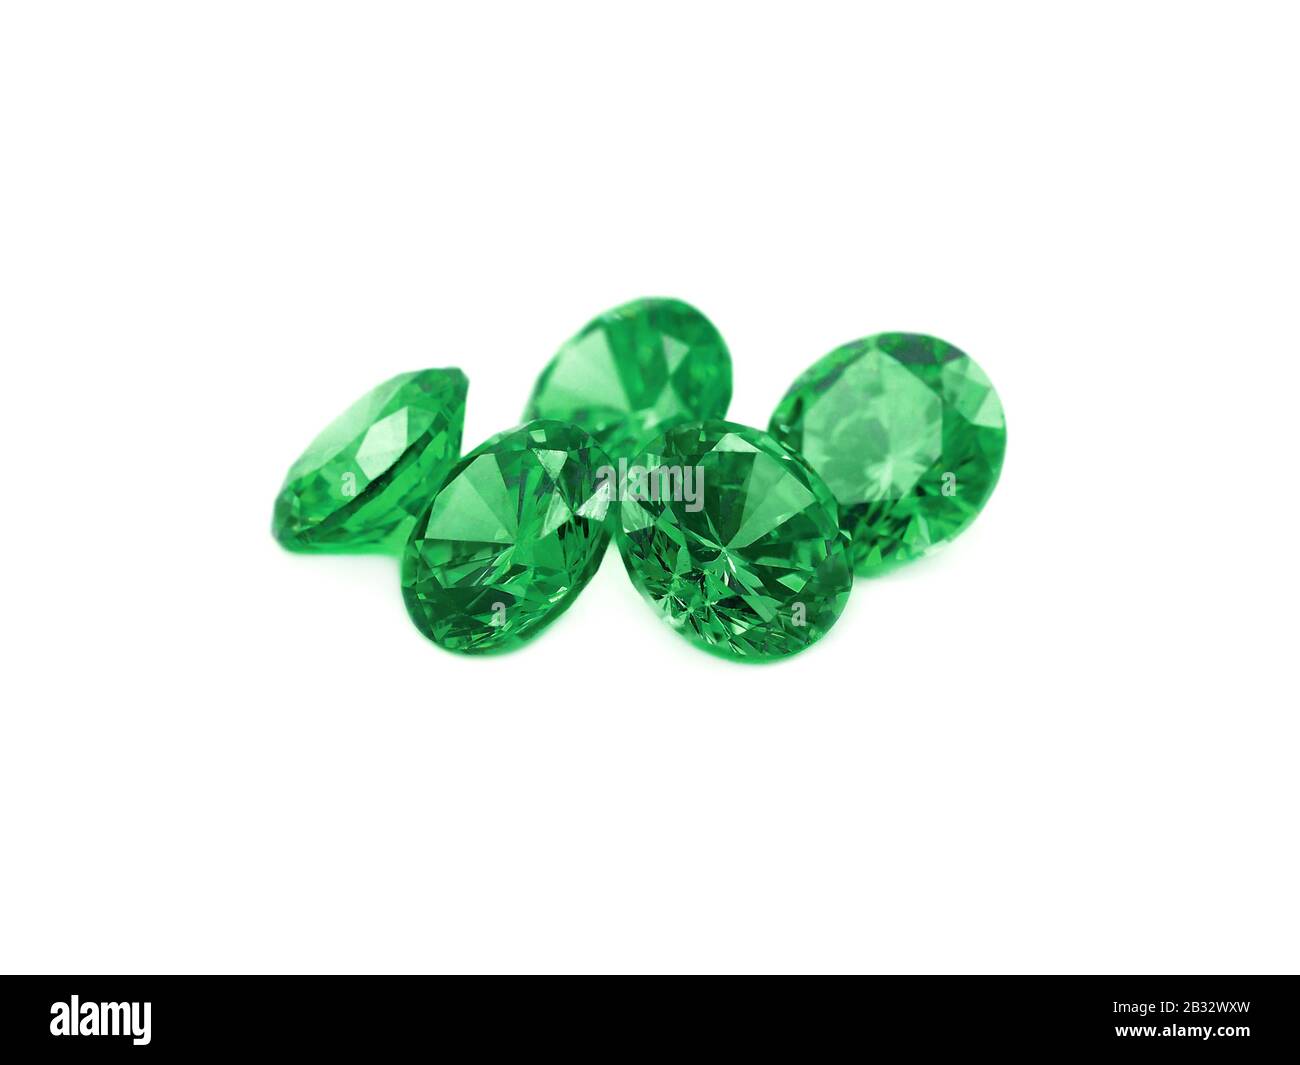 Five faceted emeralds on a white background. Stock Photo